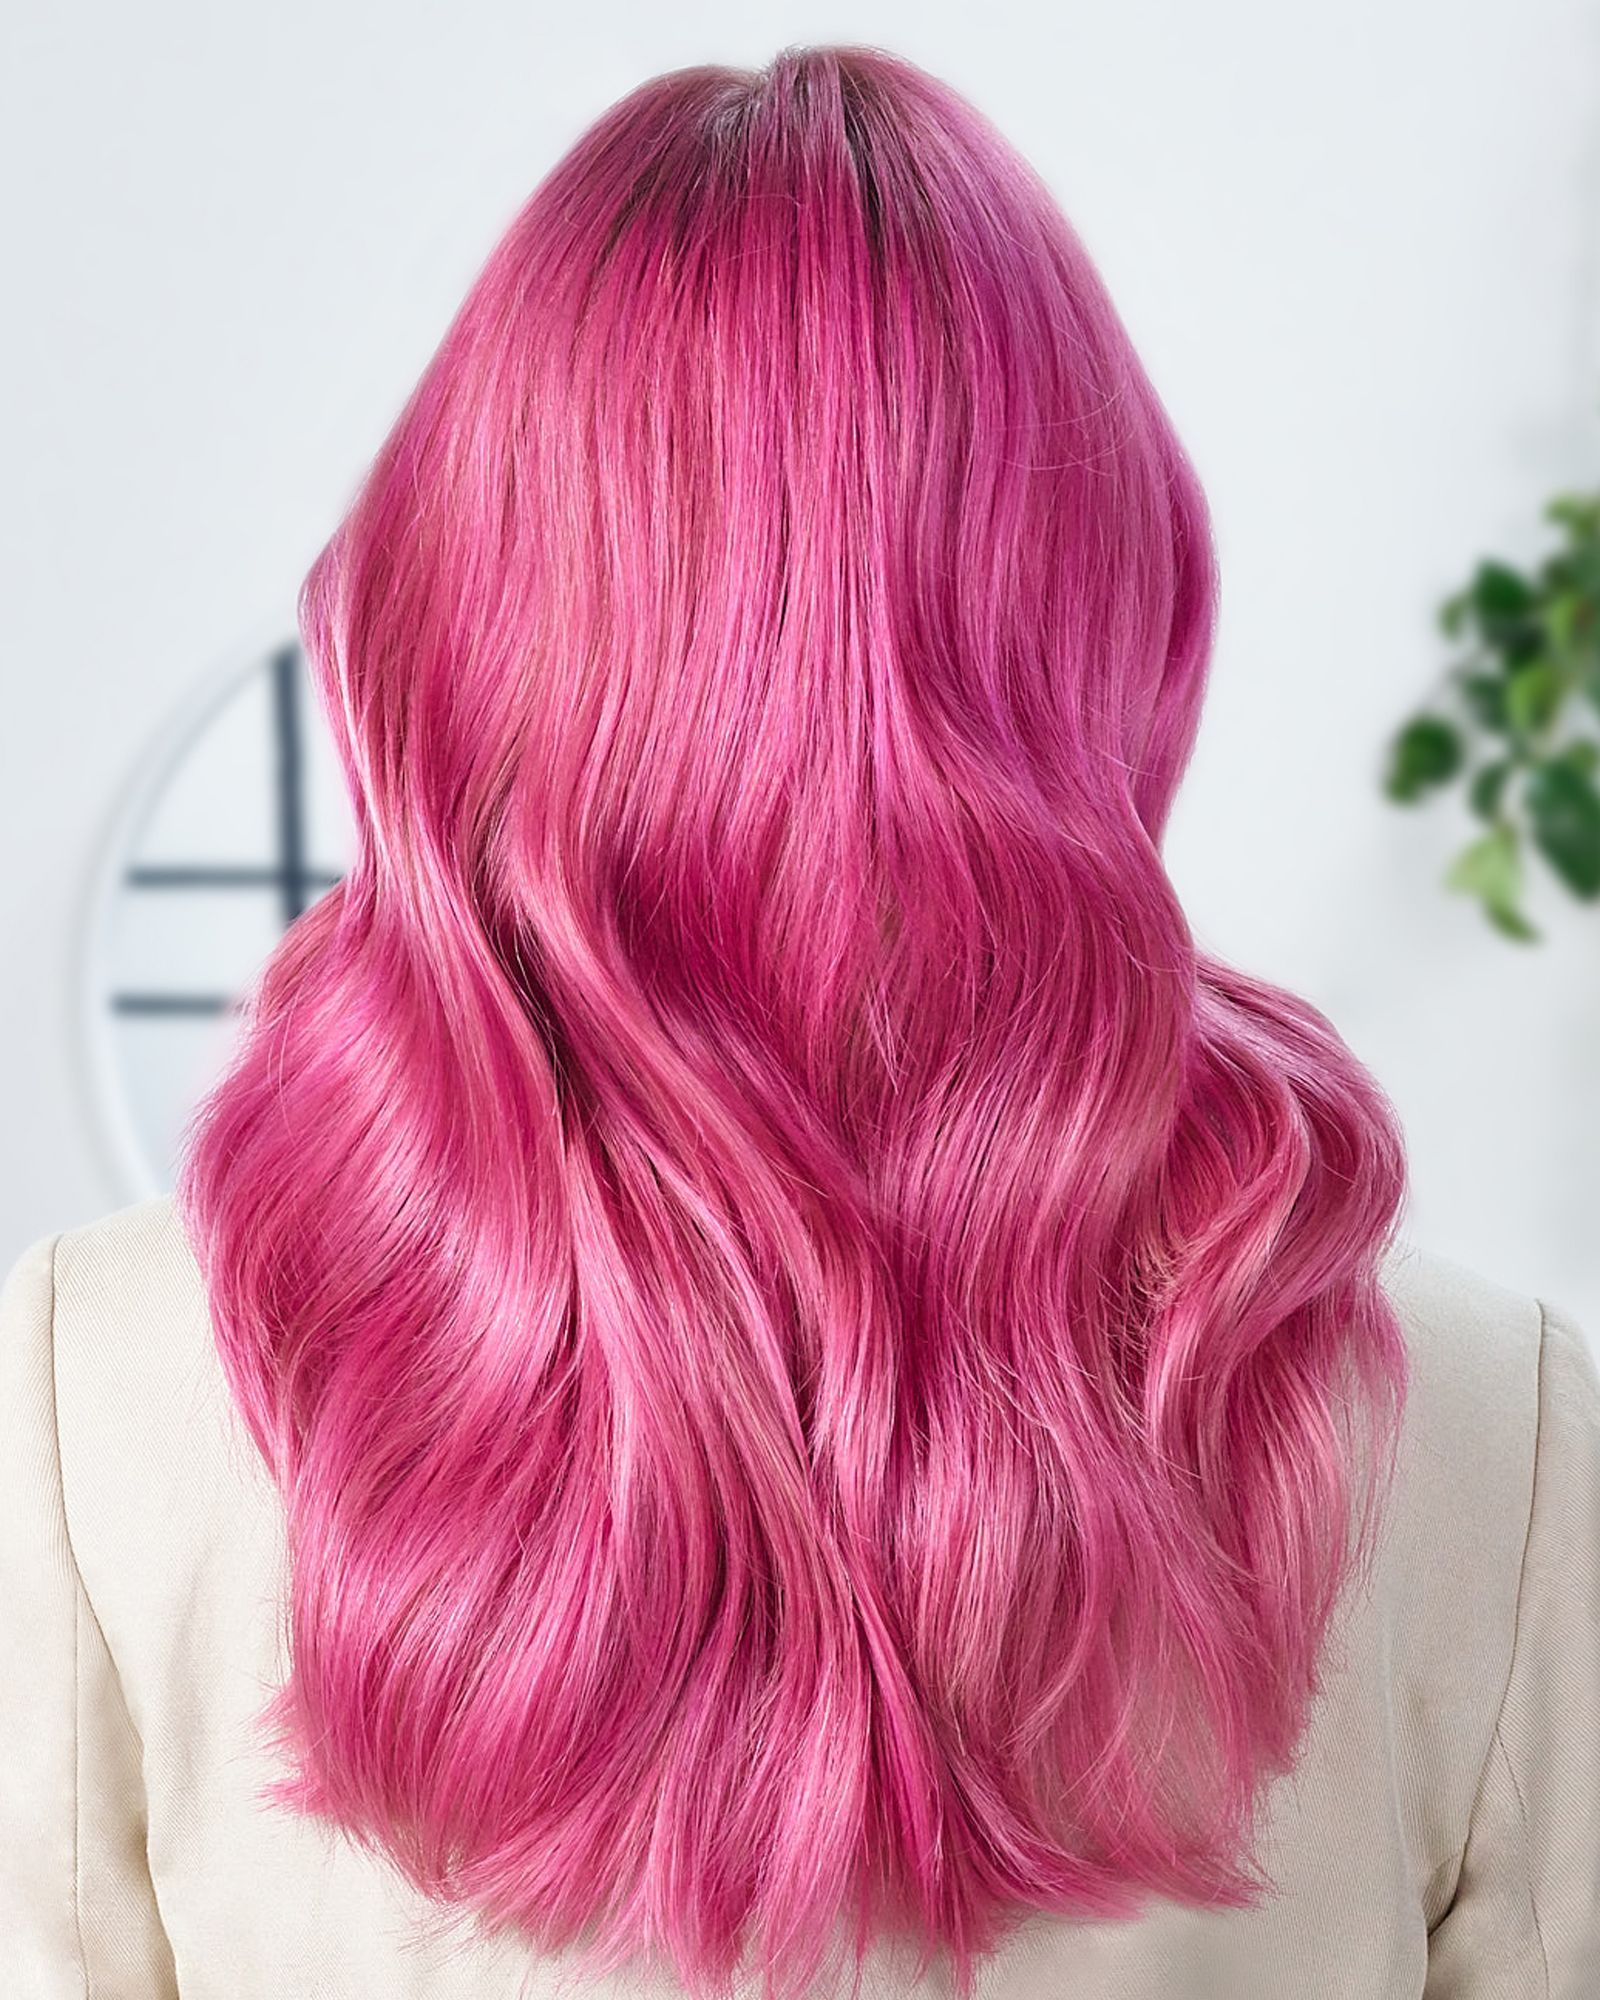 Cheveux roses